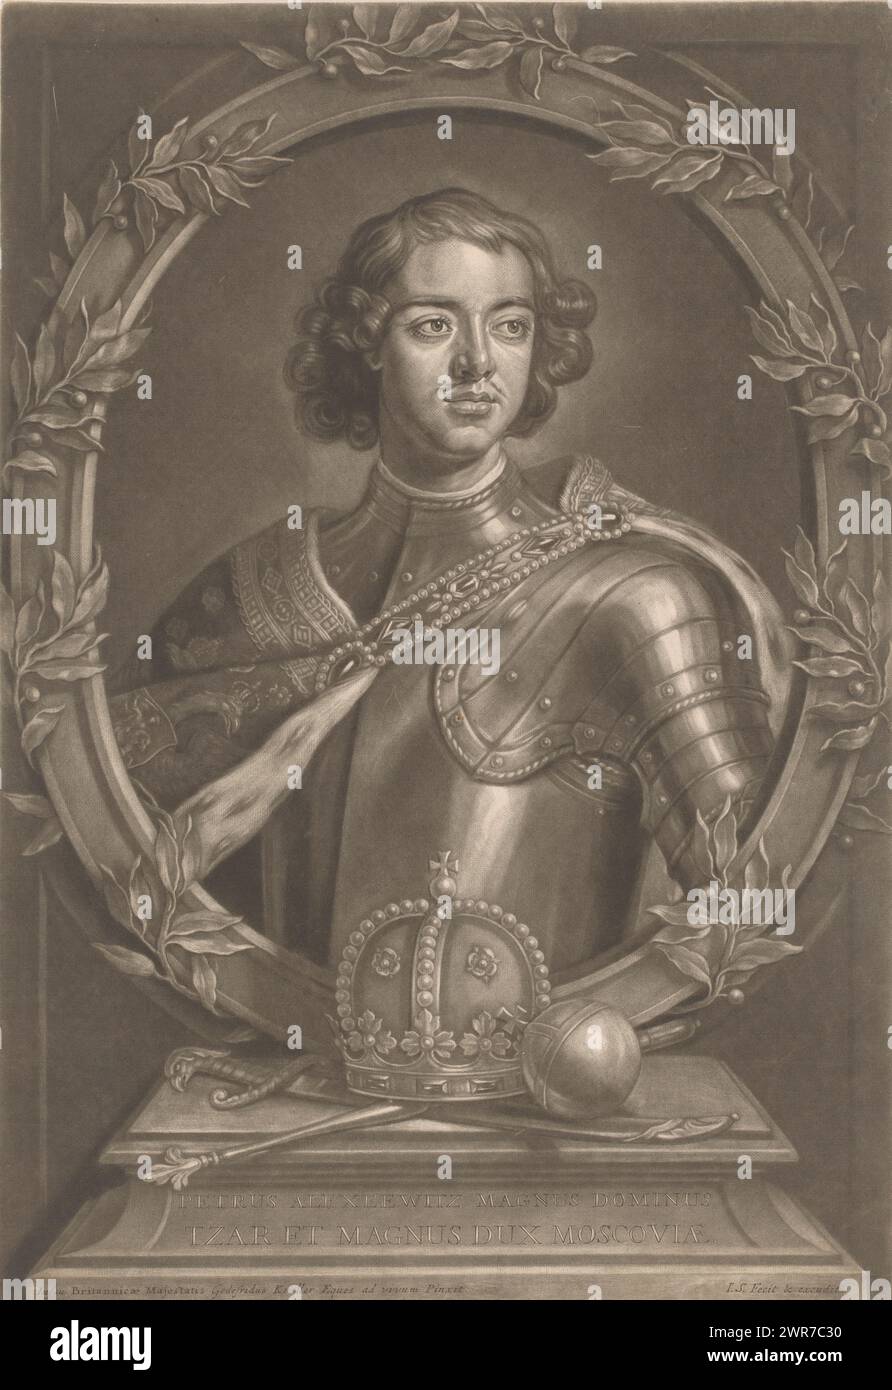 Portrait of Peter I the Great, Tsar of Russia, print maker: John Smith (prentmaker/ uitgever), after painting by: Gottfried Kneller, publisher: John Smith (prentmaker/ uitgever), 1662 - 1742, paper, engraving, height 405 mm × width 279 mm, print Stock Photo